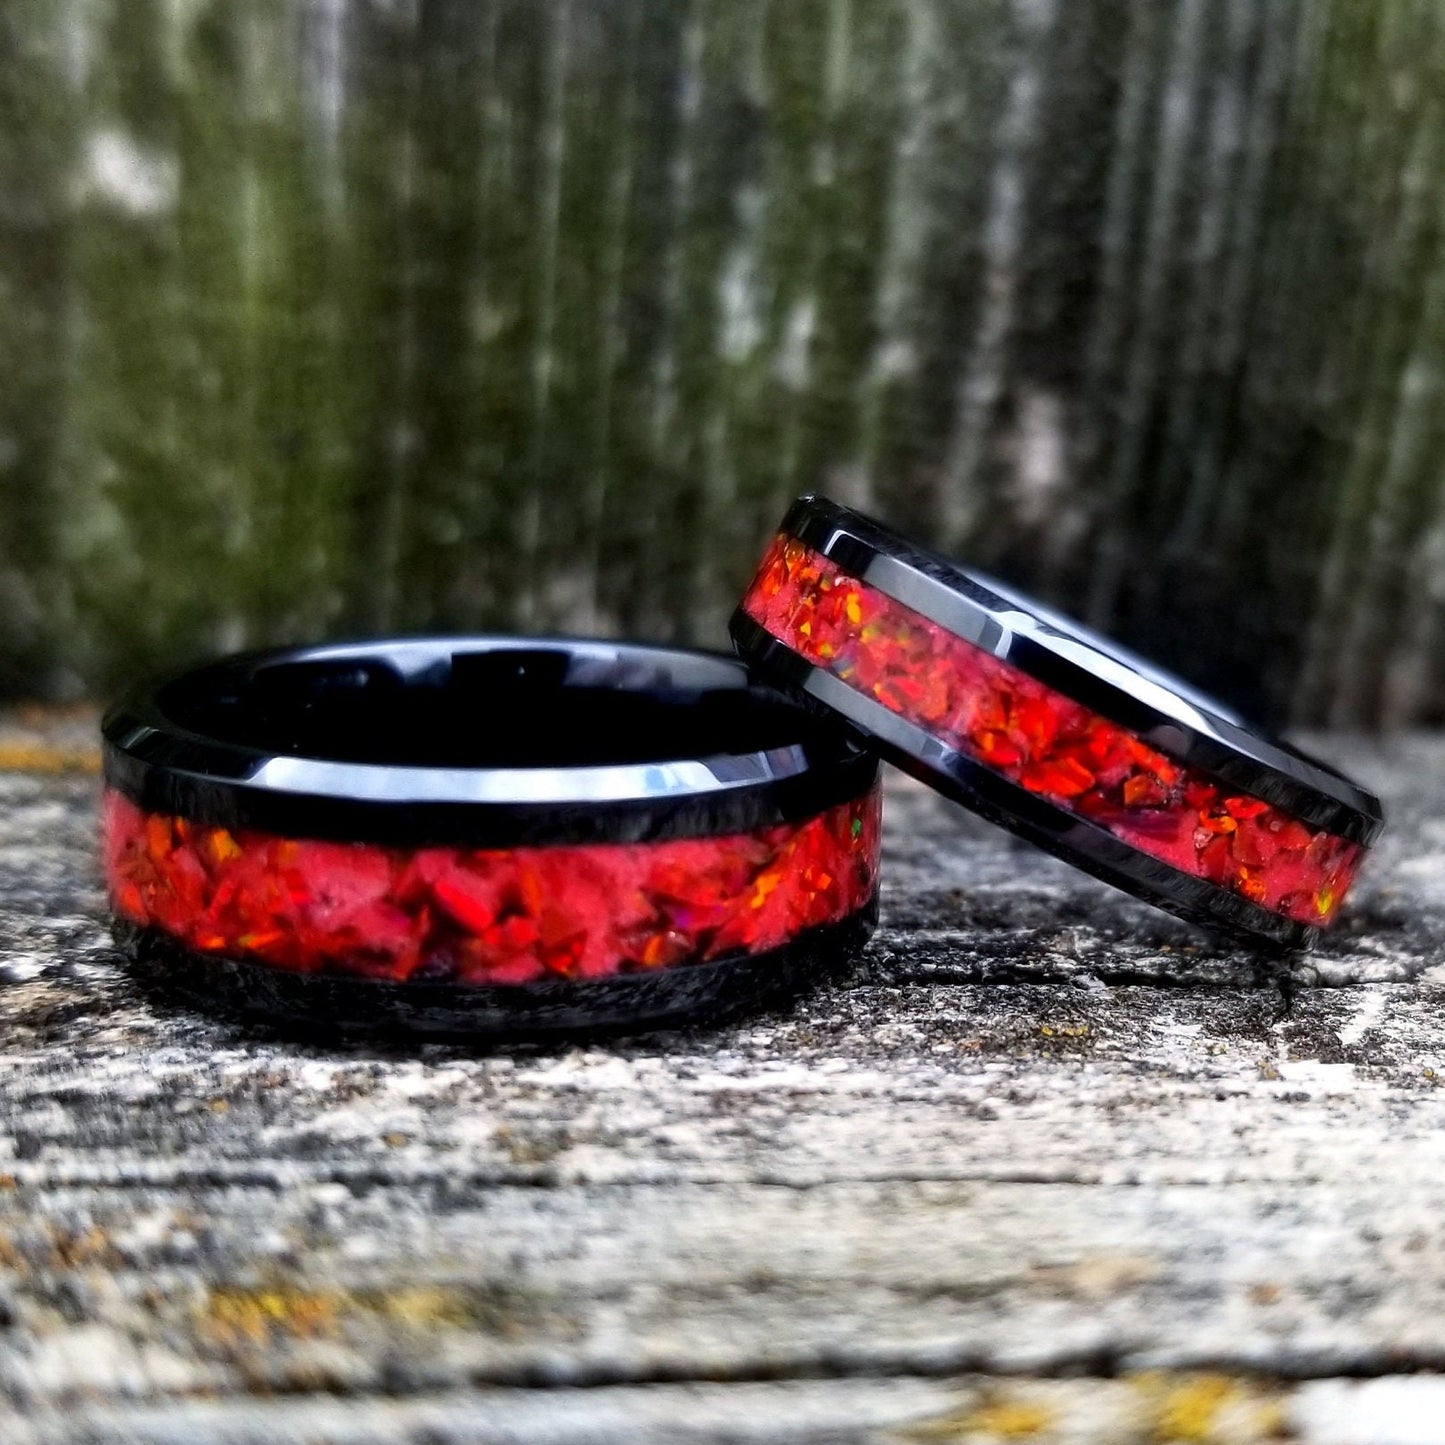 Black ceramic ring with red fire opal and glowstone inlay. Black ceramic ring. Red opal. Opal ring. Men's ring. Women's ring. Sizes 5-13